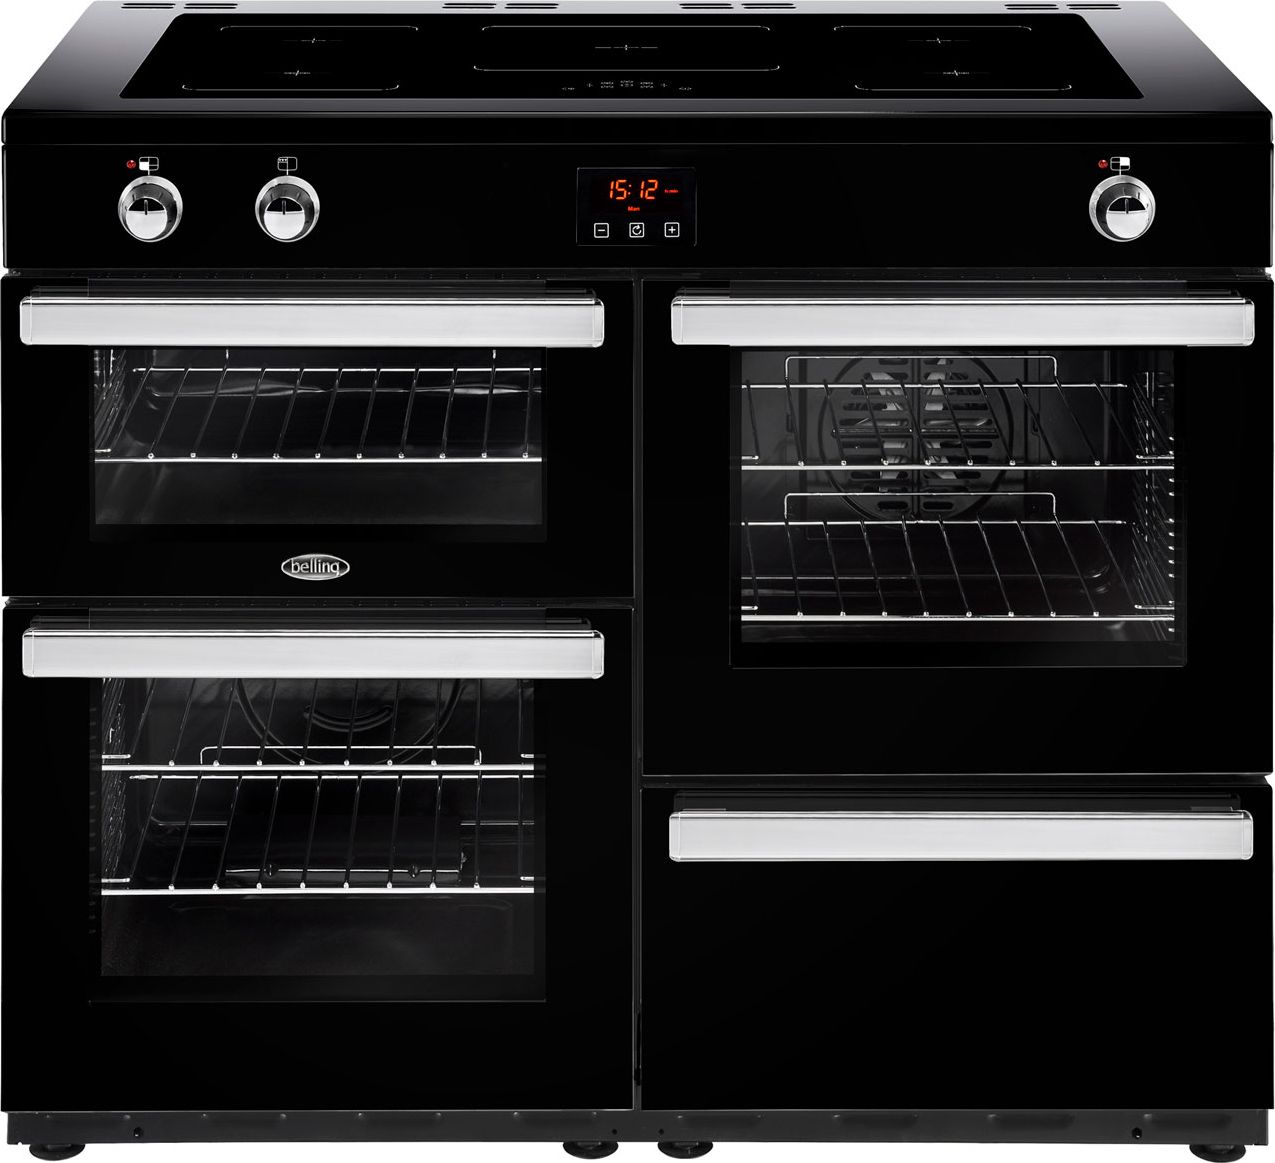 Belling Cookcentre110Ei 110cm Electric Range Cooker with Induction Hob - Black - A/A Rated, Black